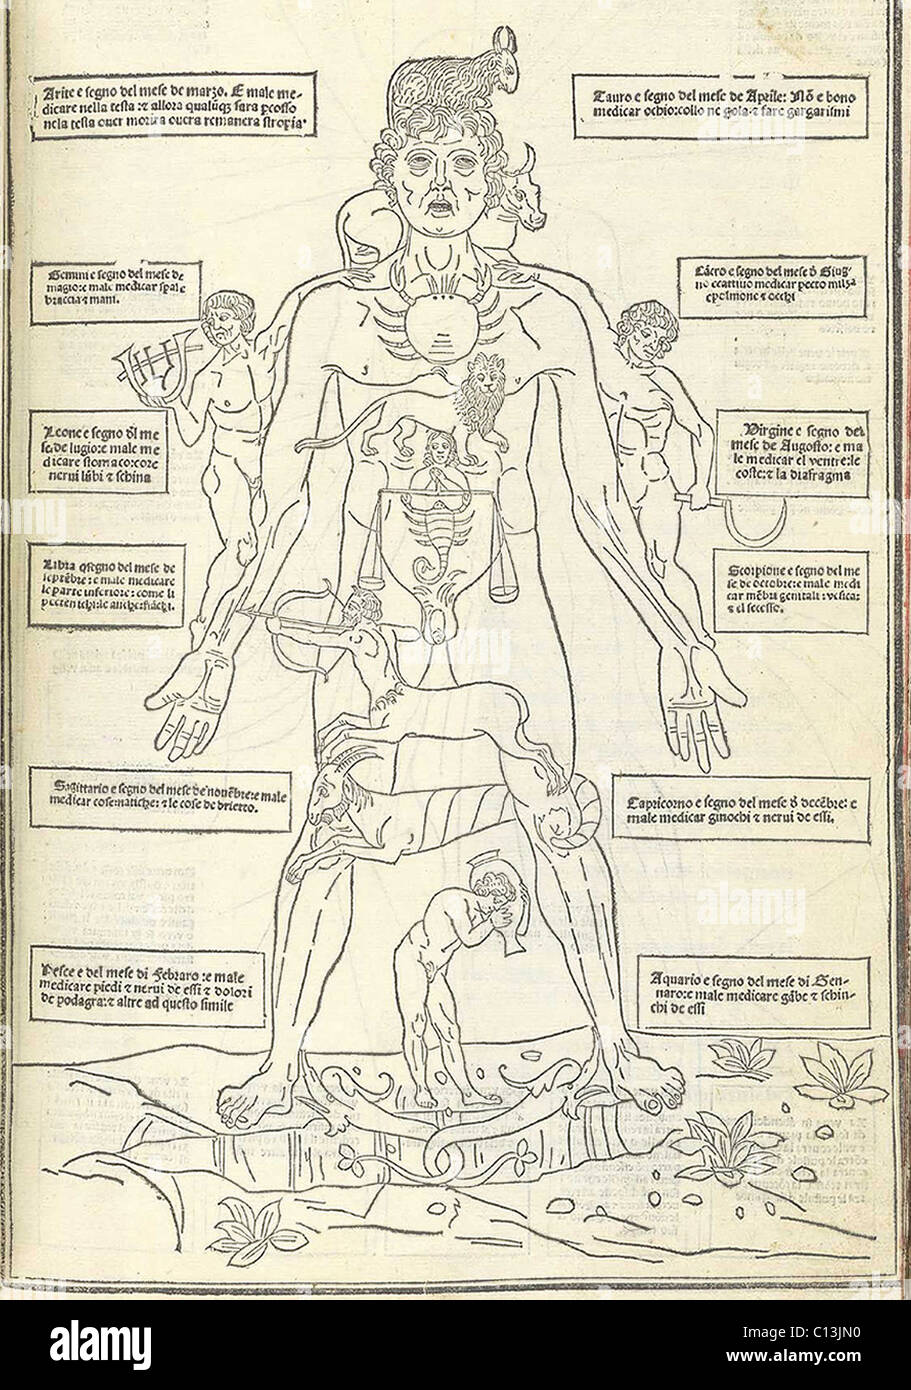 Zodiac Man from illustrating how the human body relates to the zodiac signs. The ancient medical theory held that the four humors were influenced by the position of the stars, linking health care to astrology. From Johannes de Ketham's FASCICULUS MEDICINAE (Venice, 1495). Stock Photo